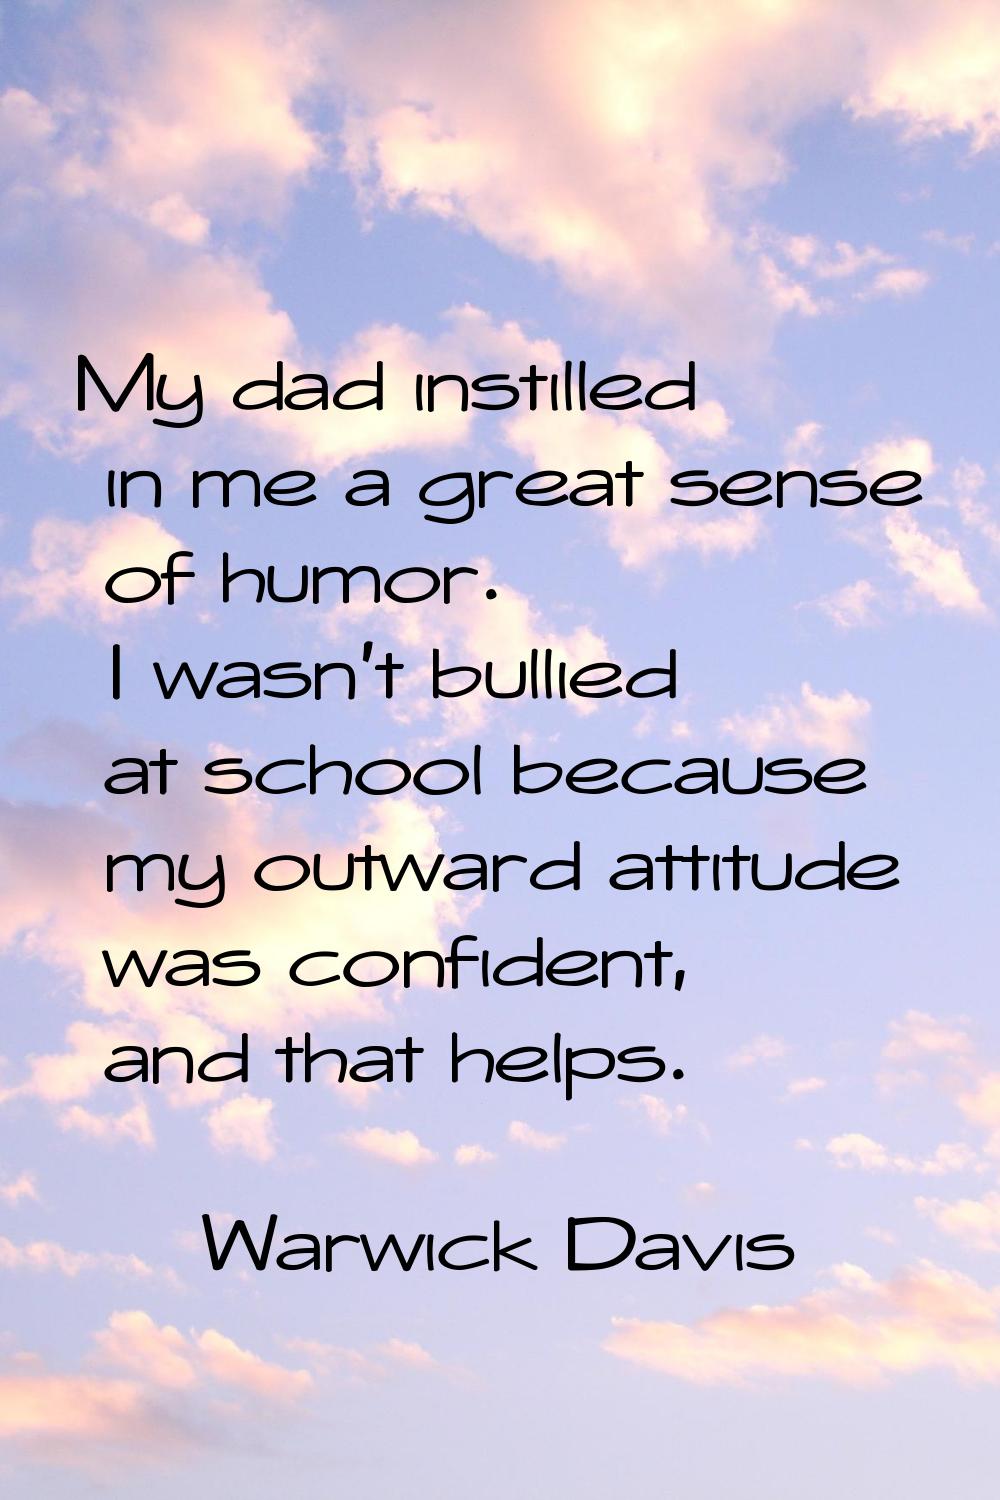 My dad instilled in me a great sense of humor. I wasn't bullied at school because my outward attitu